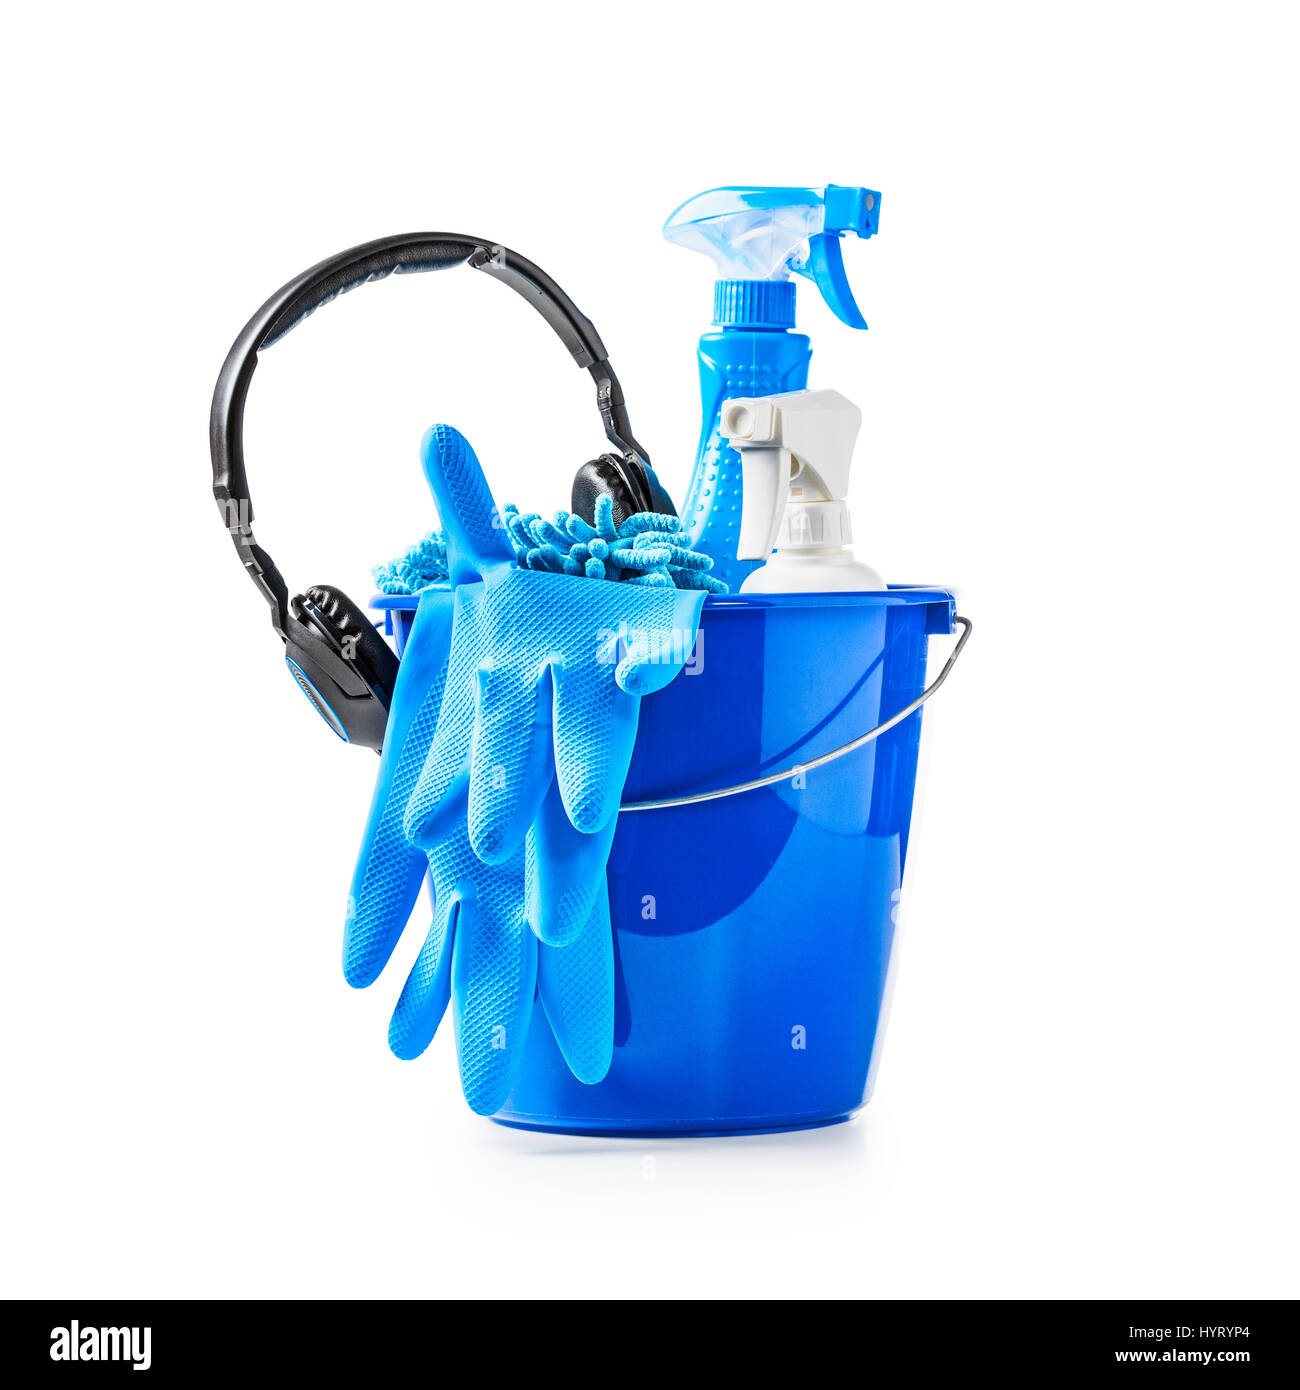 Blue bucket with cleaning supplies and music headphone isolated on white background. Single object with clipping path Stock Photo